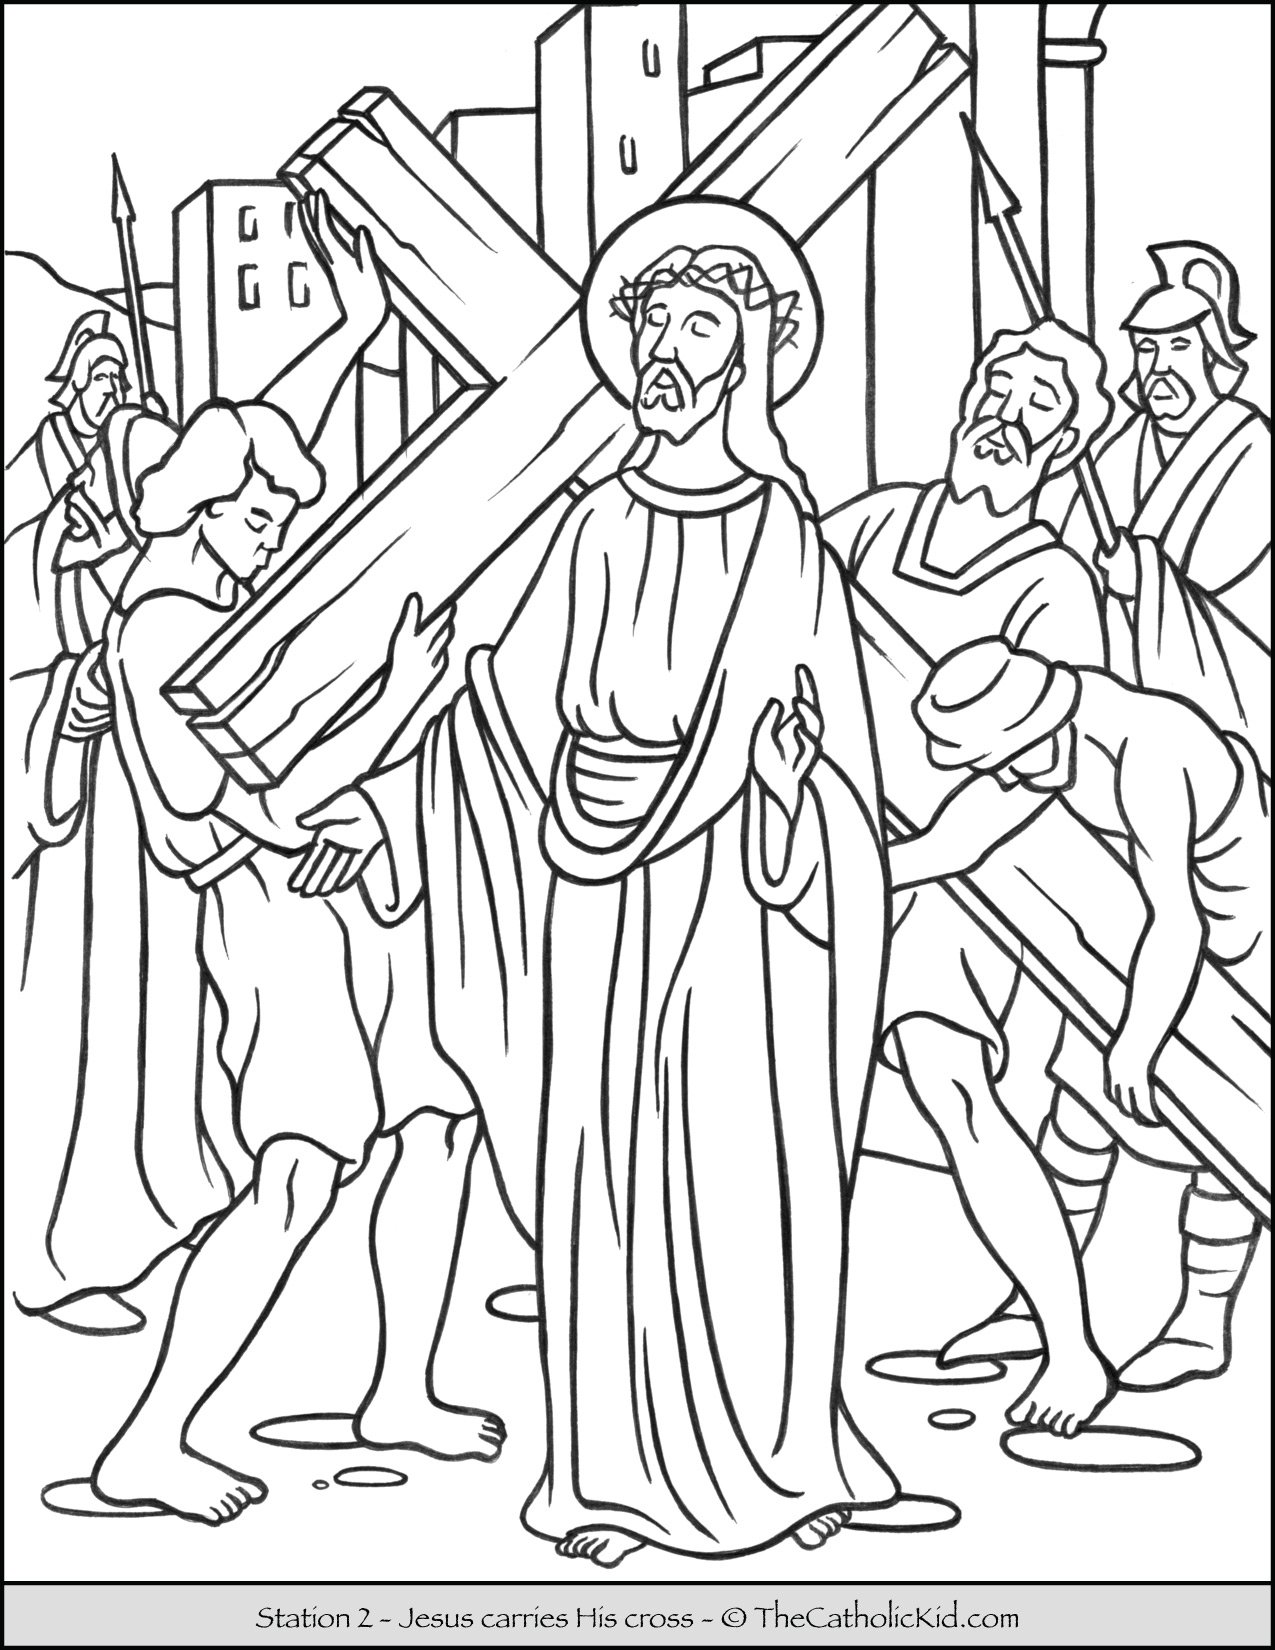 Stations of the cross catholic coloring pages for kids